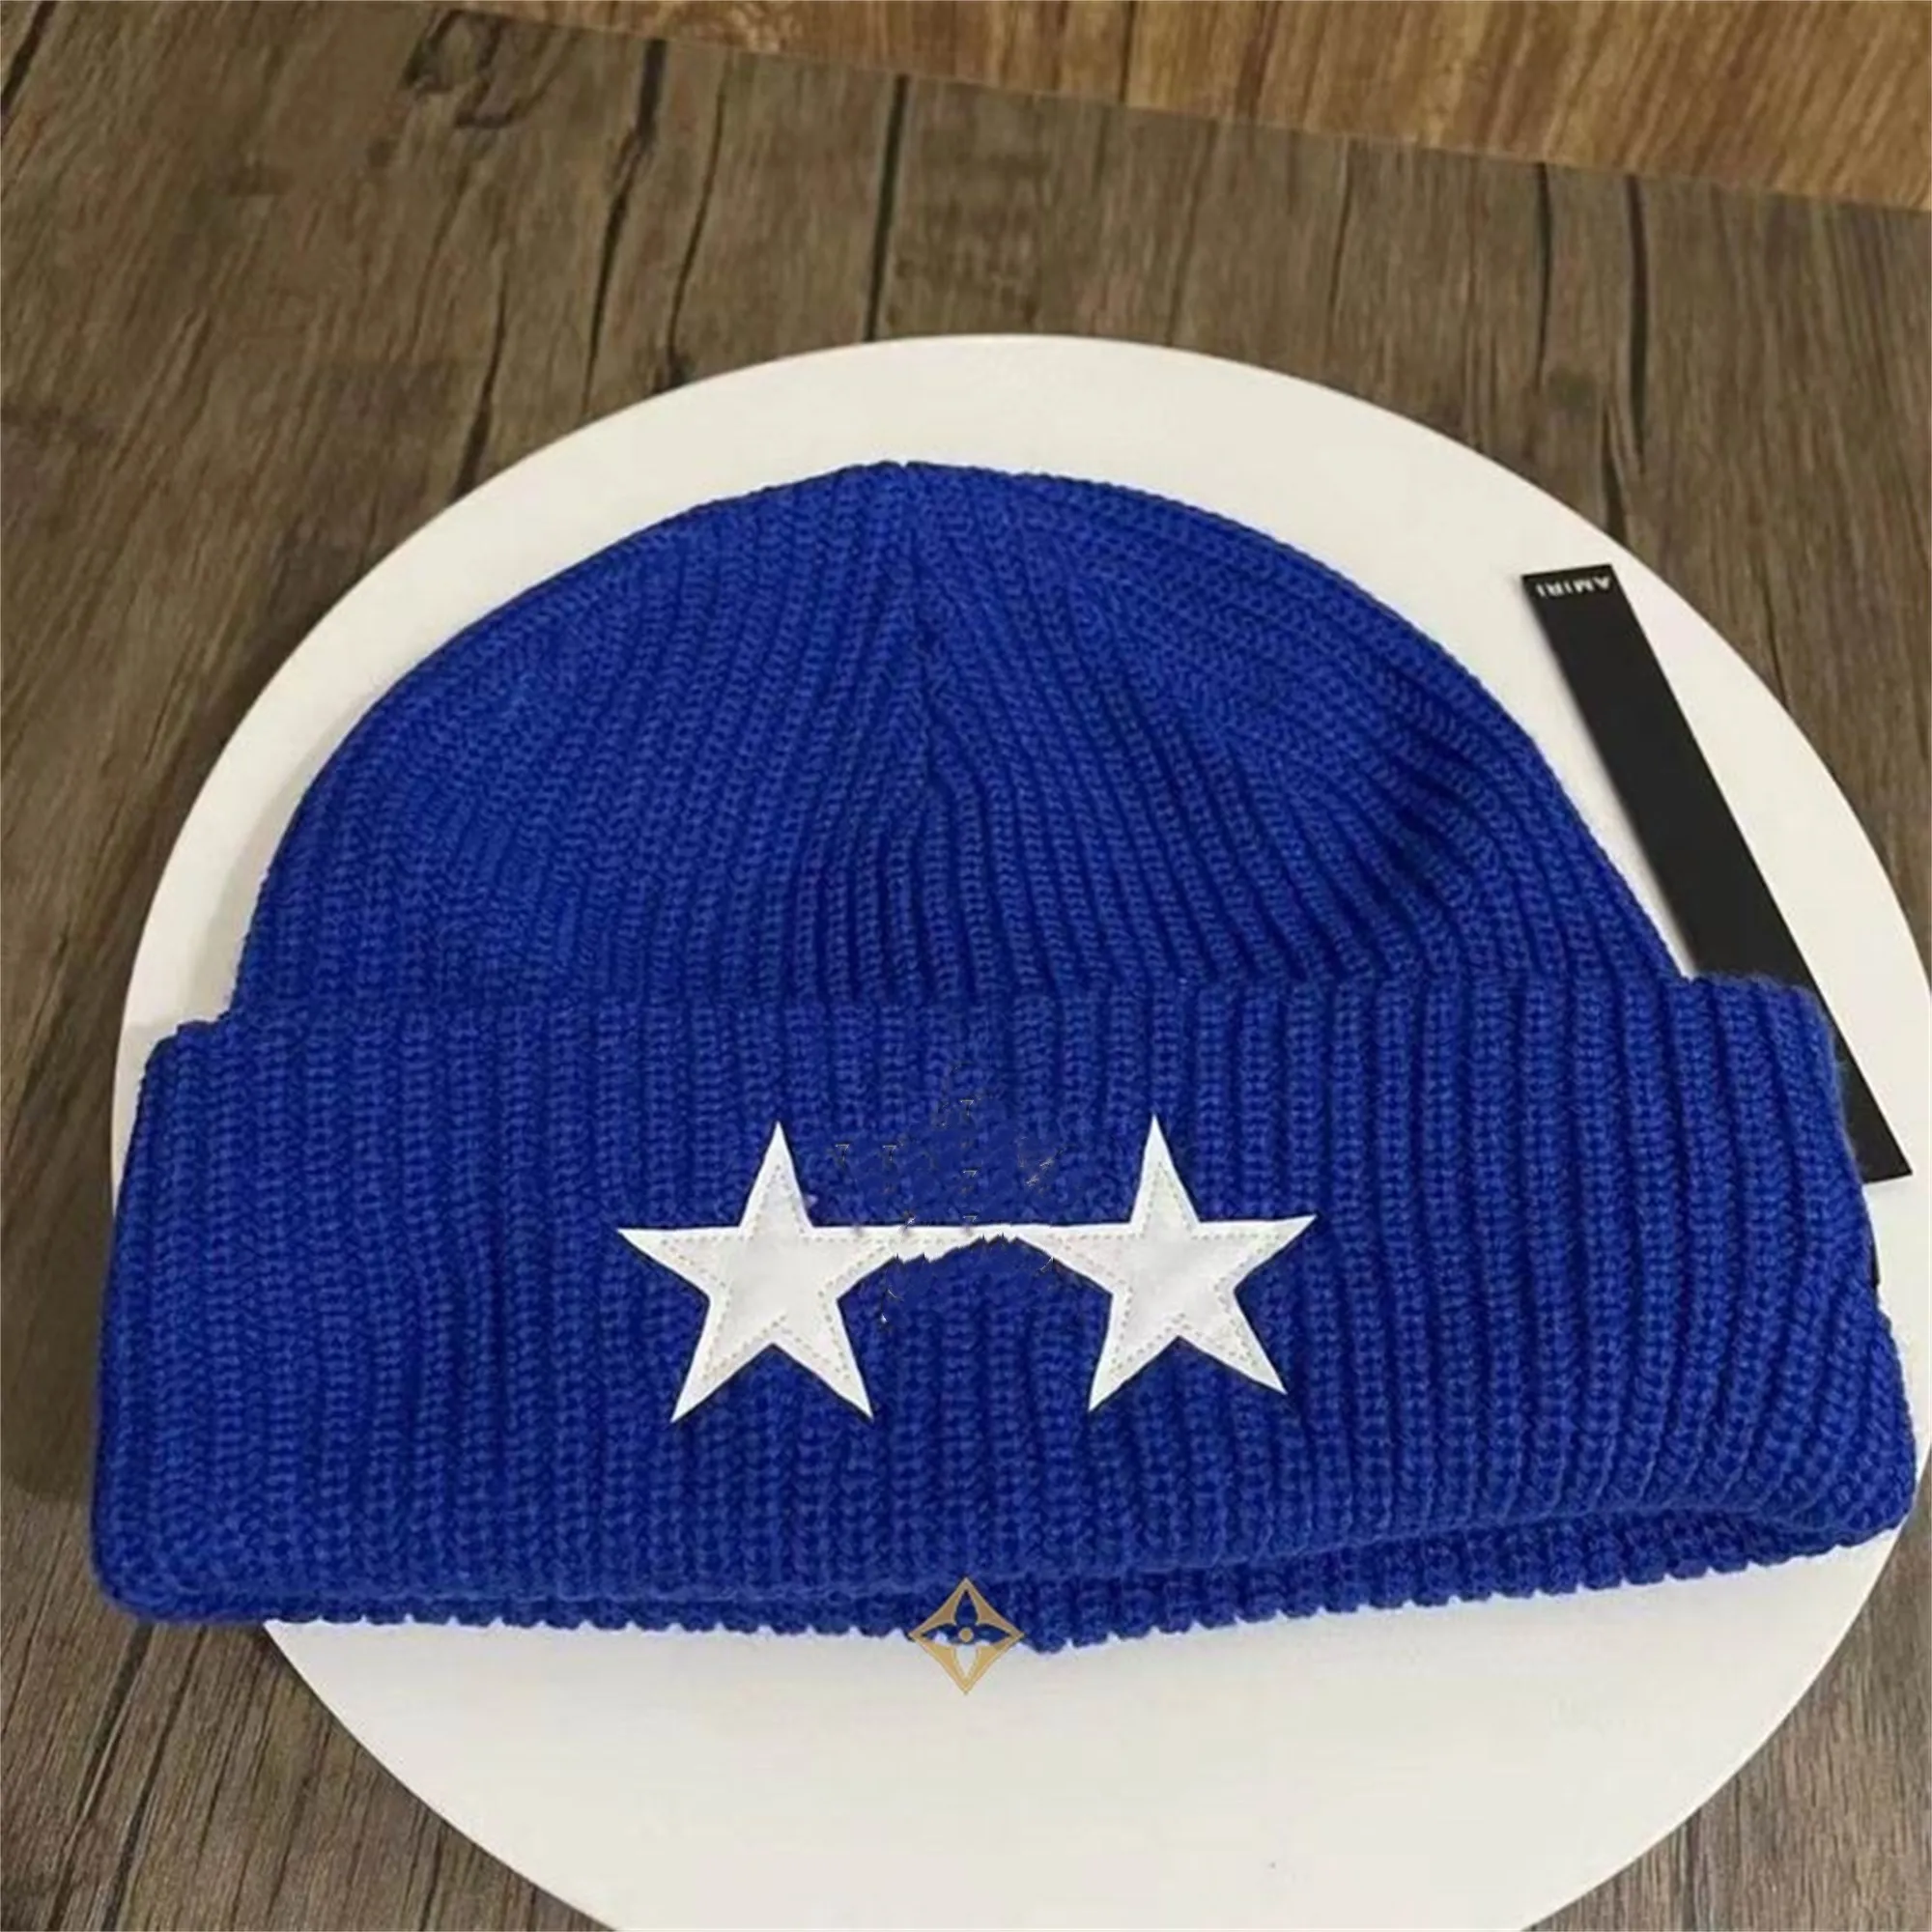 Designer hat beanie fashion knit hat luxury baseball cap autumn and winter cashmere warm men and women casquette outdoors bucket fitted hats christmas present HH